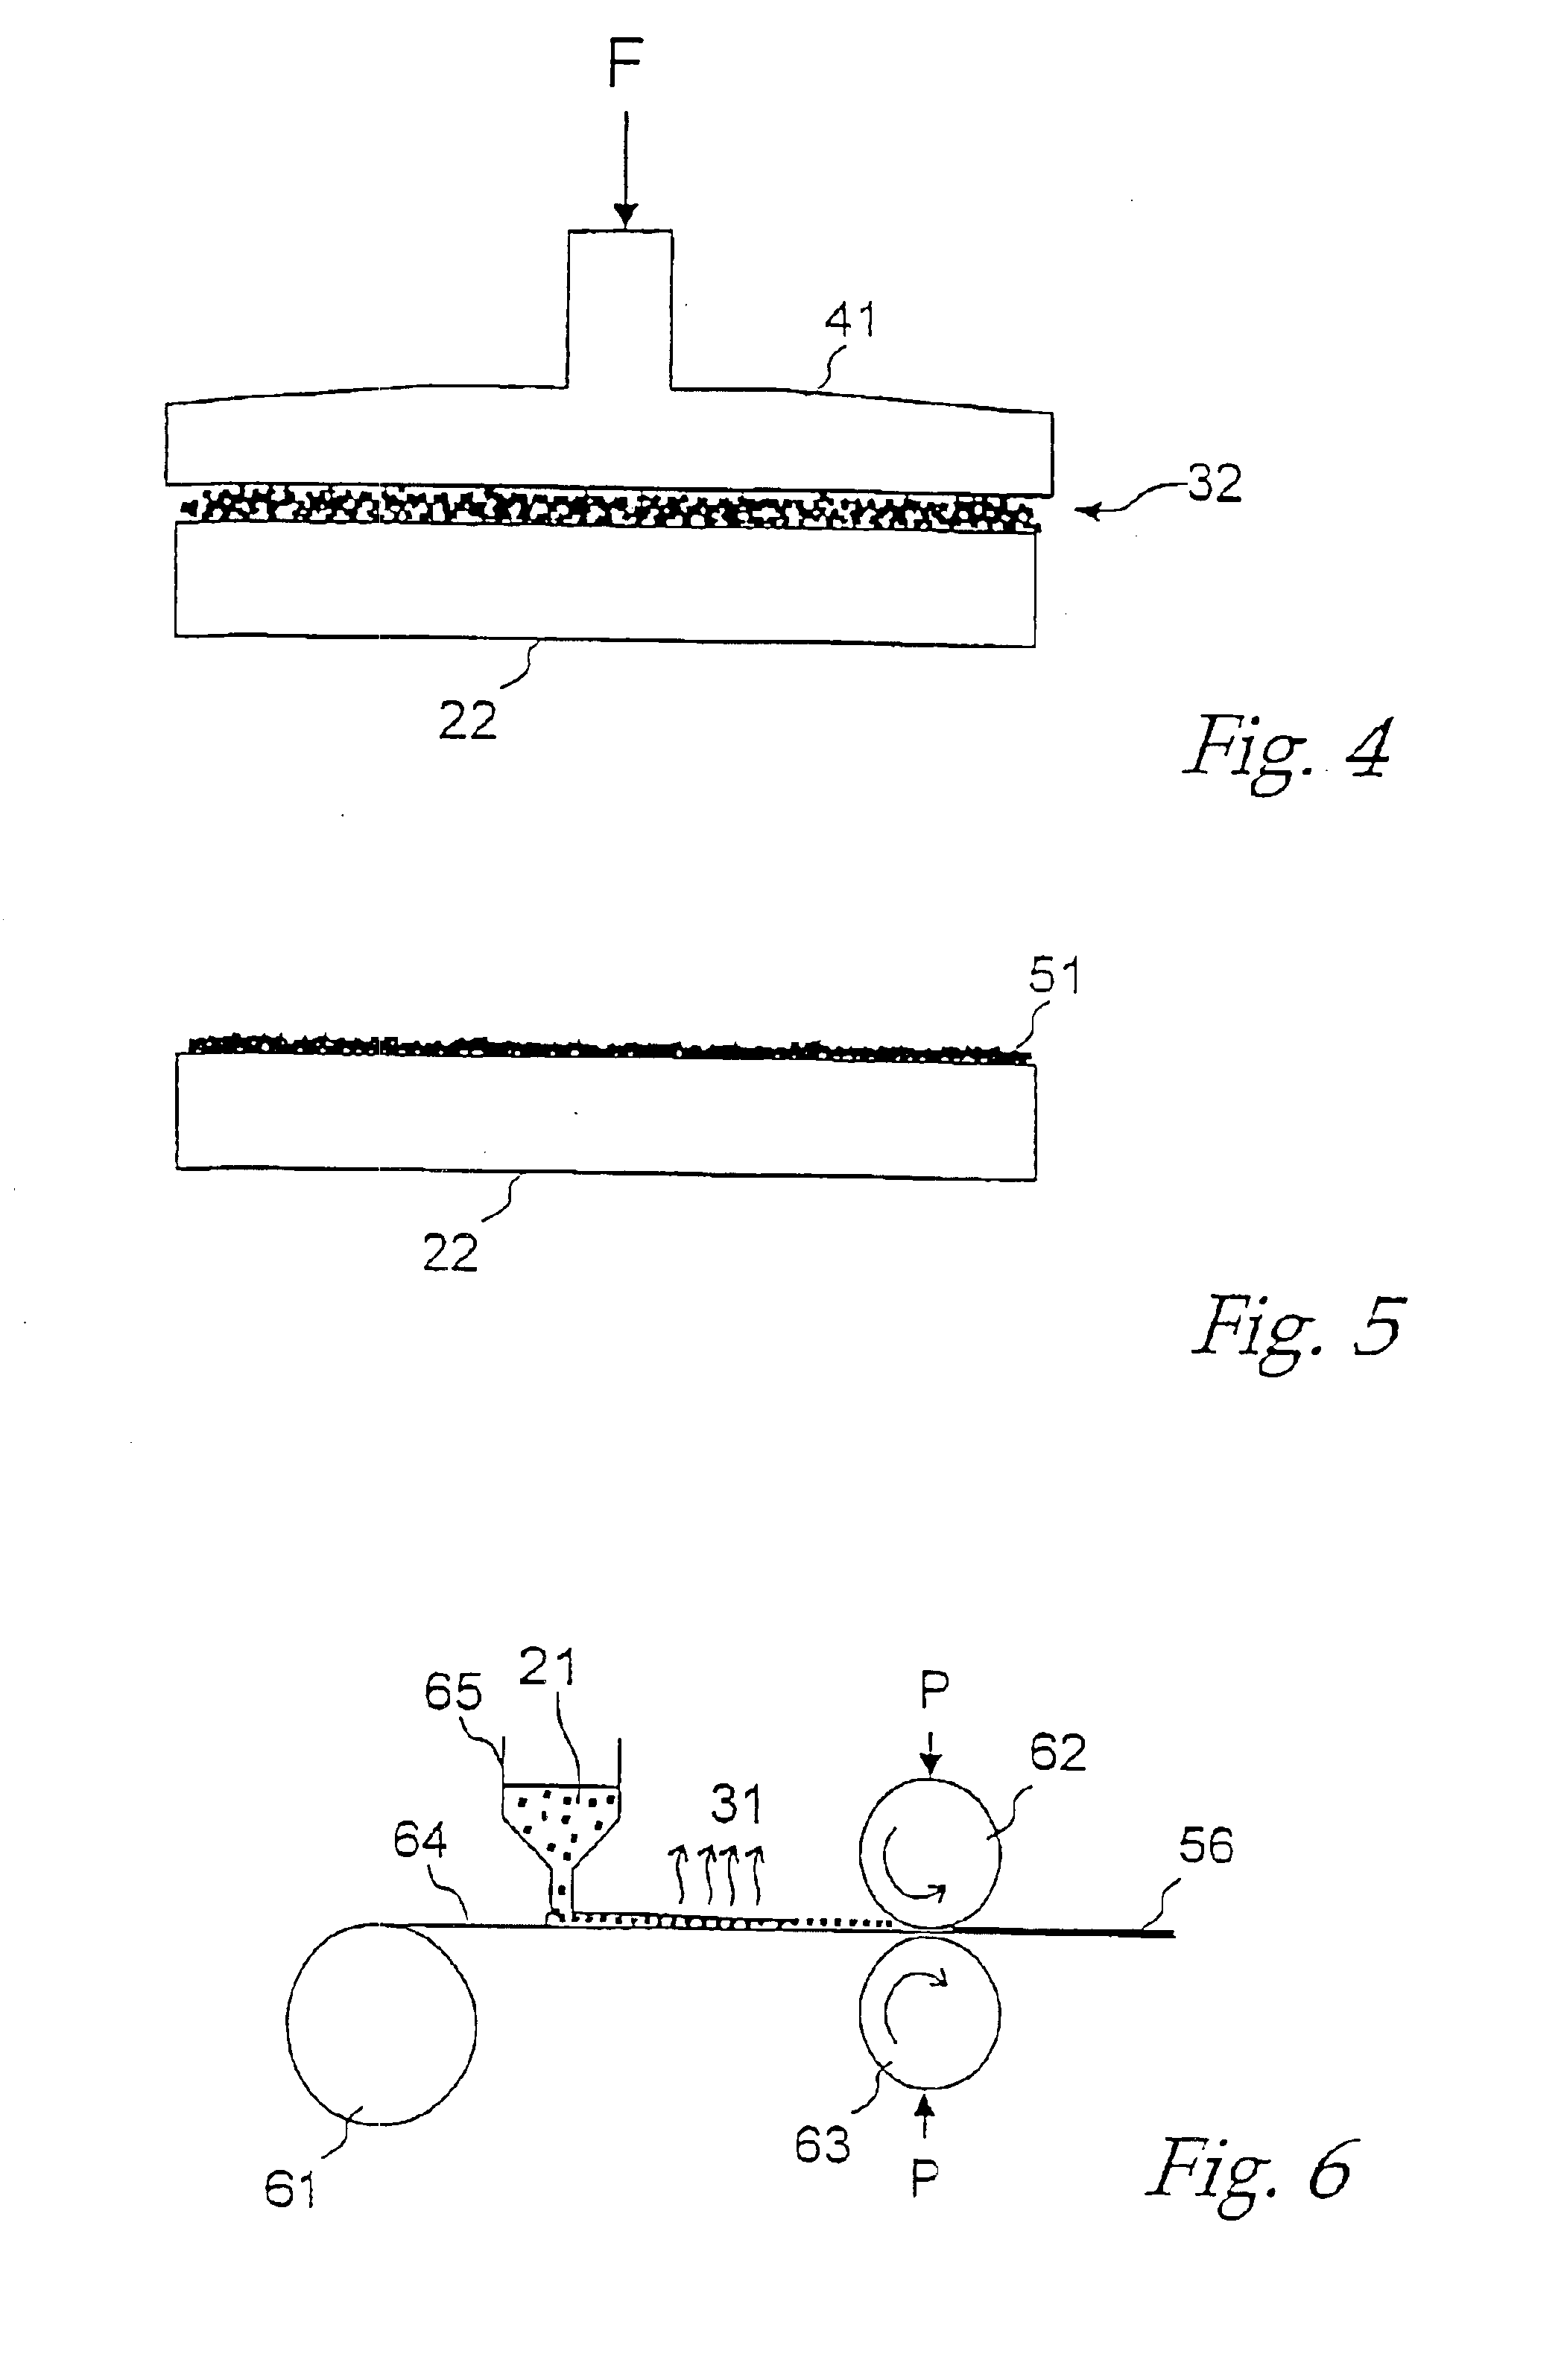 Method for manufacturing nanostructured thin film electrodes